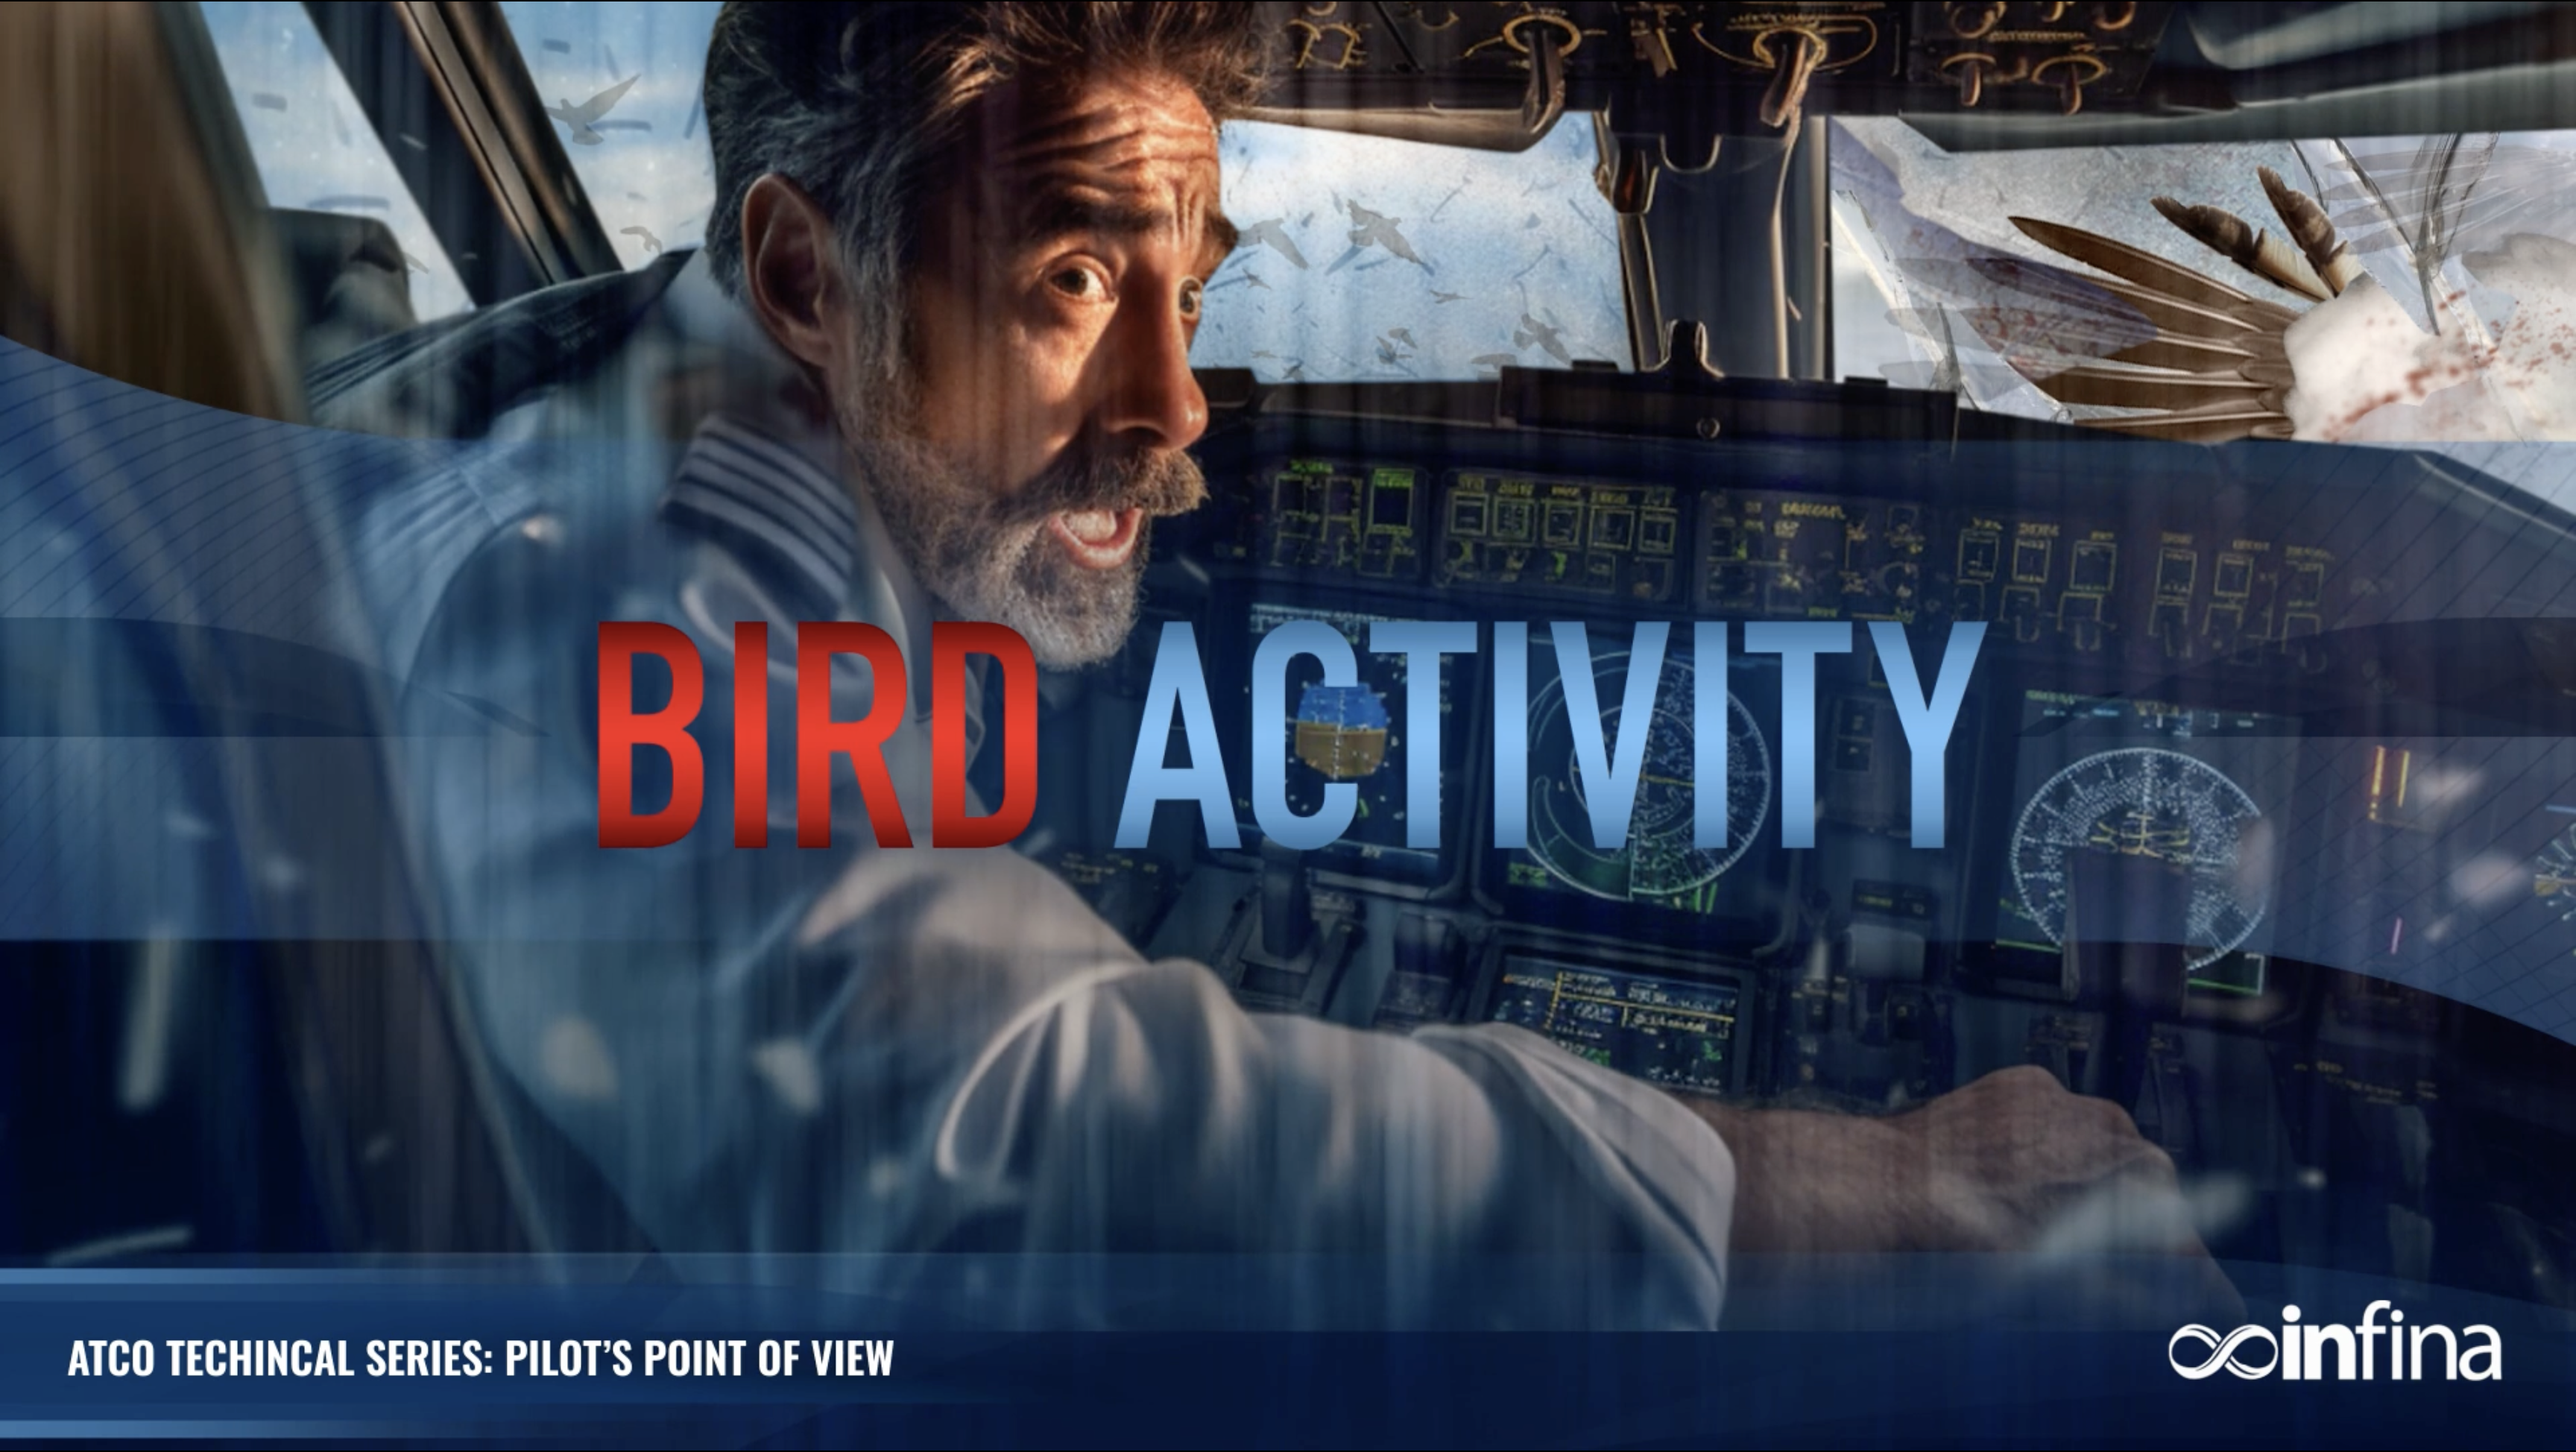 For ATCOs from Pilots: Bird Activity